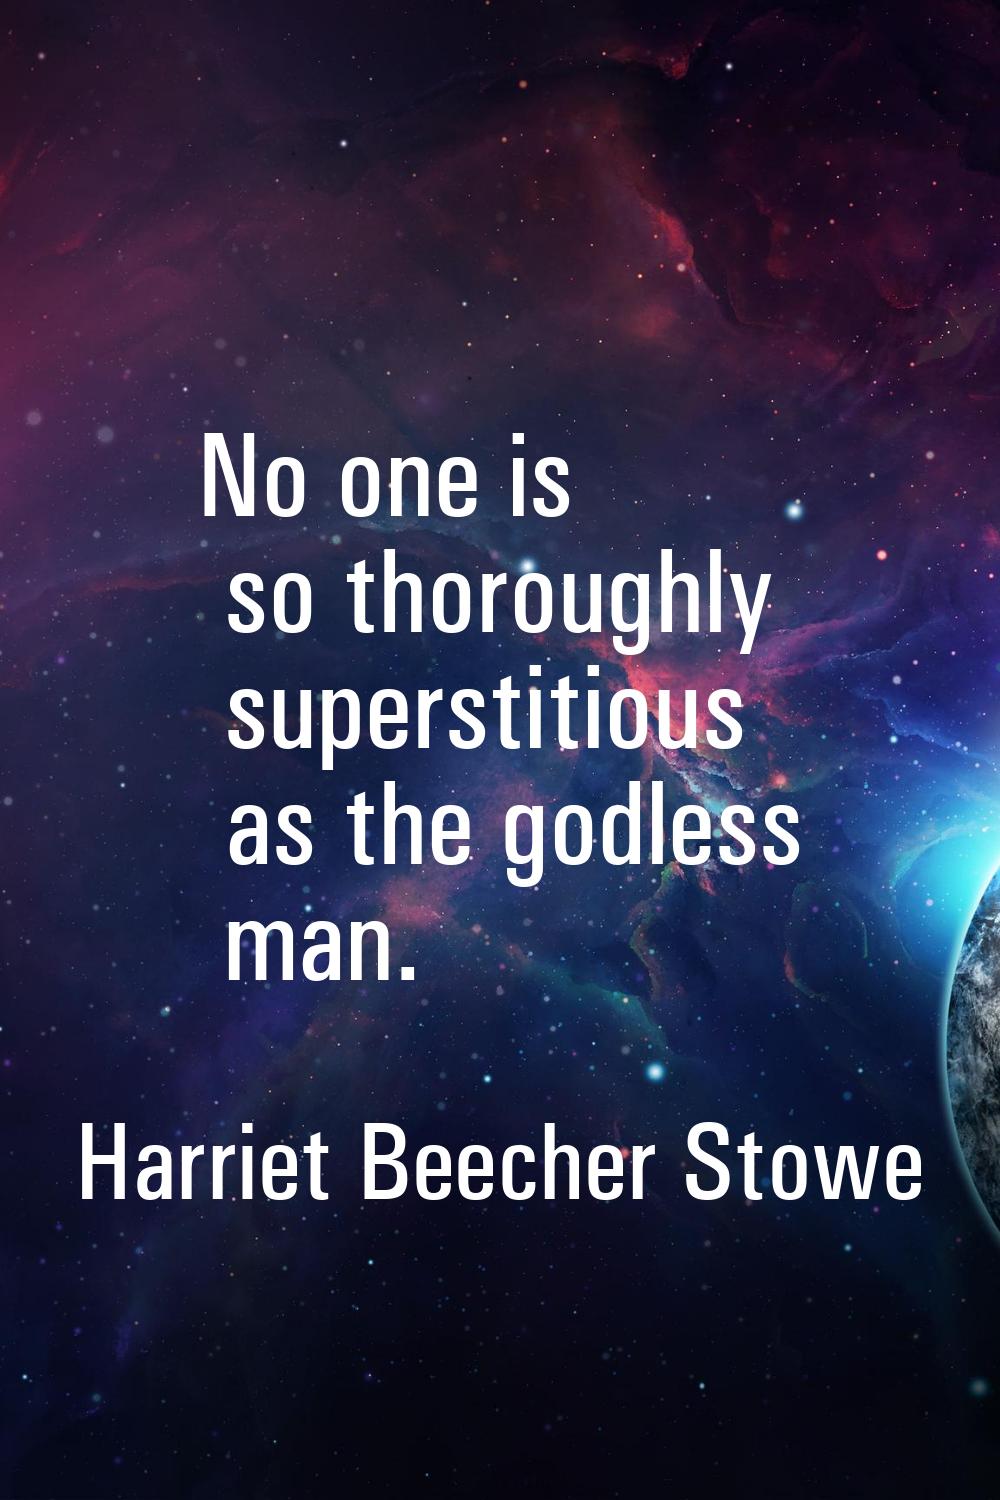 No one is so thoroughly superstitious as the godless man.